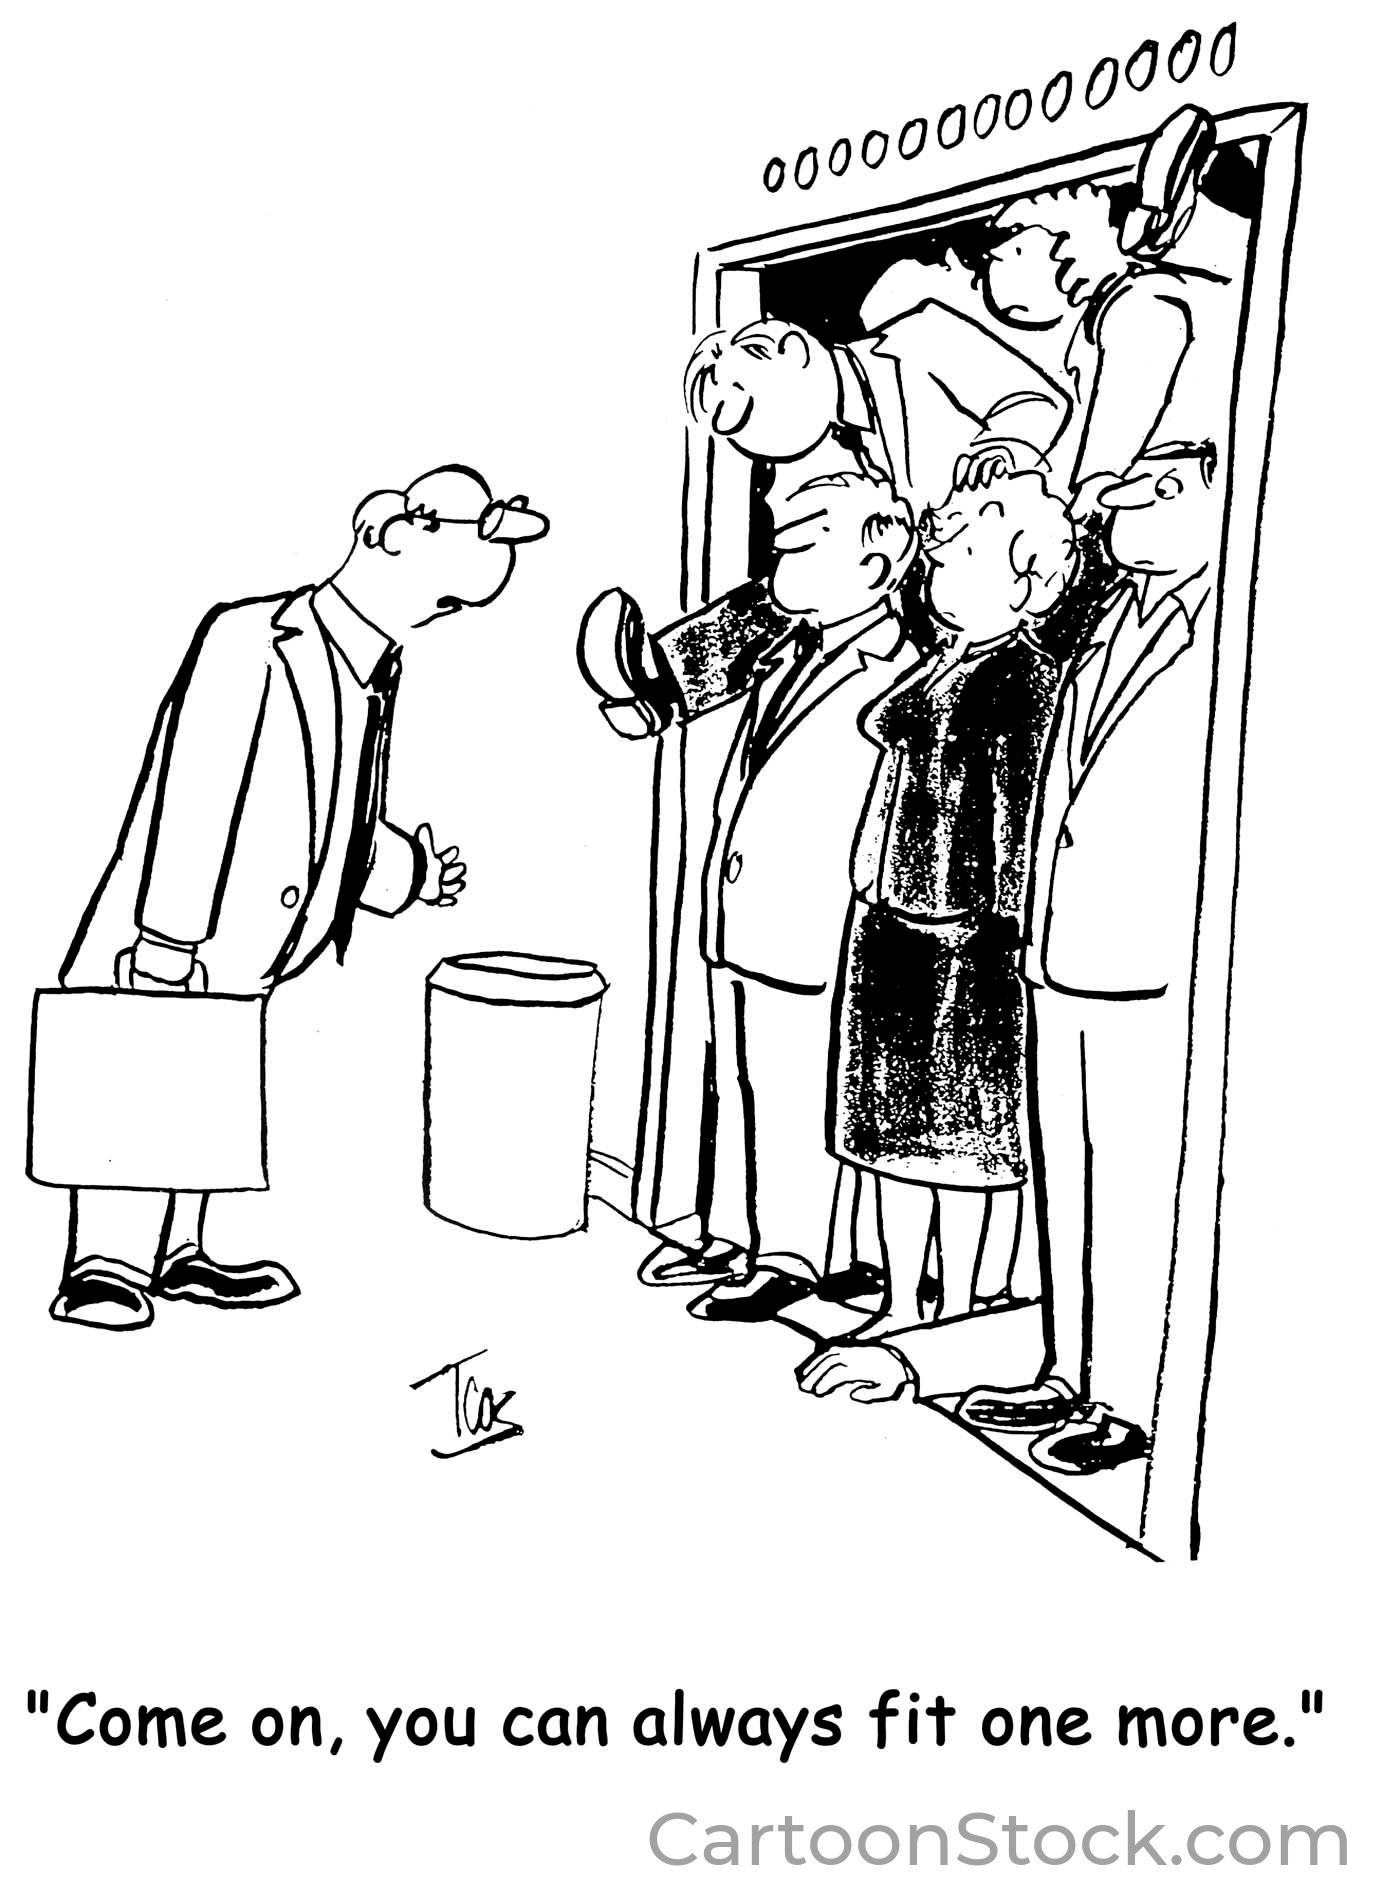 cartoon of an elevator full of people and a man trying to get on; text below says 